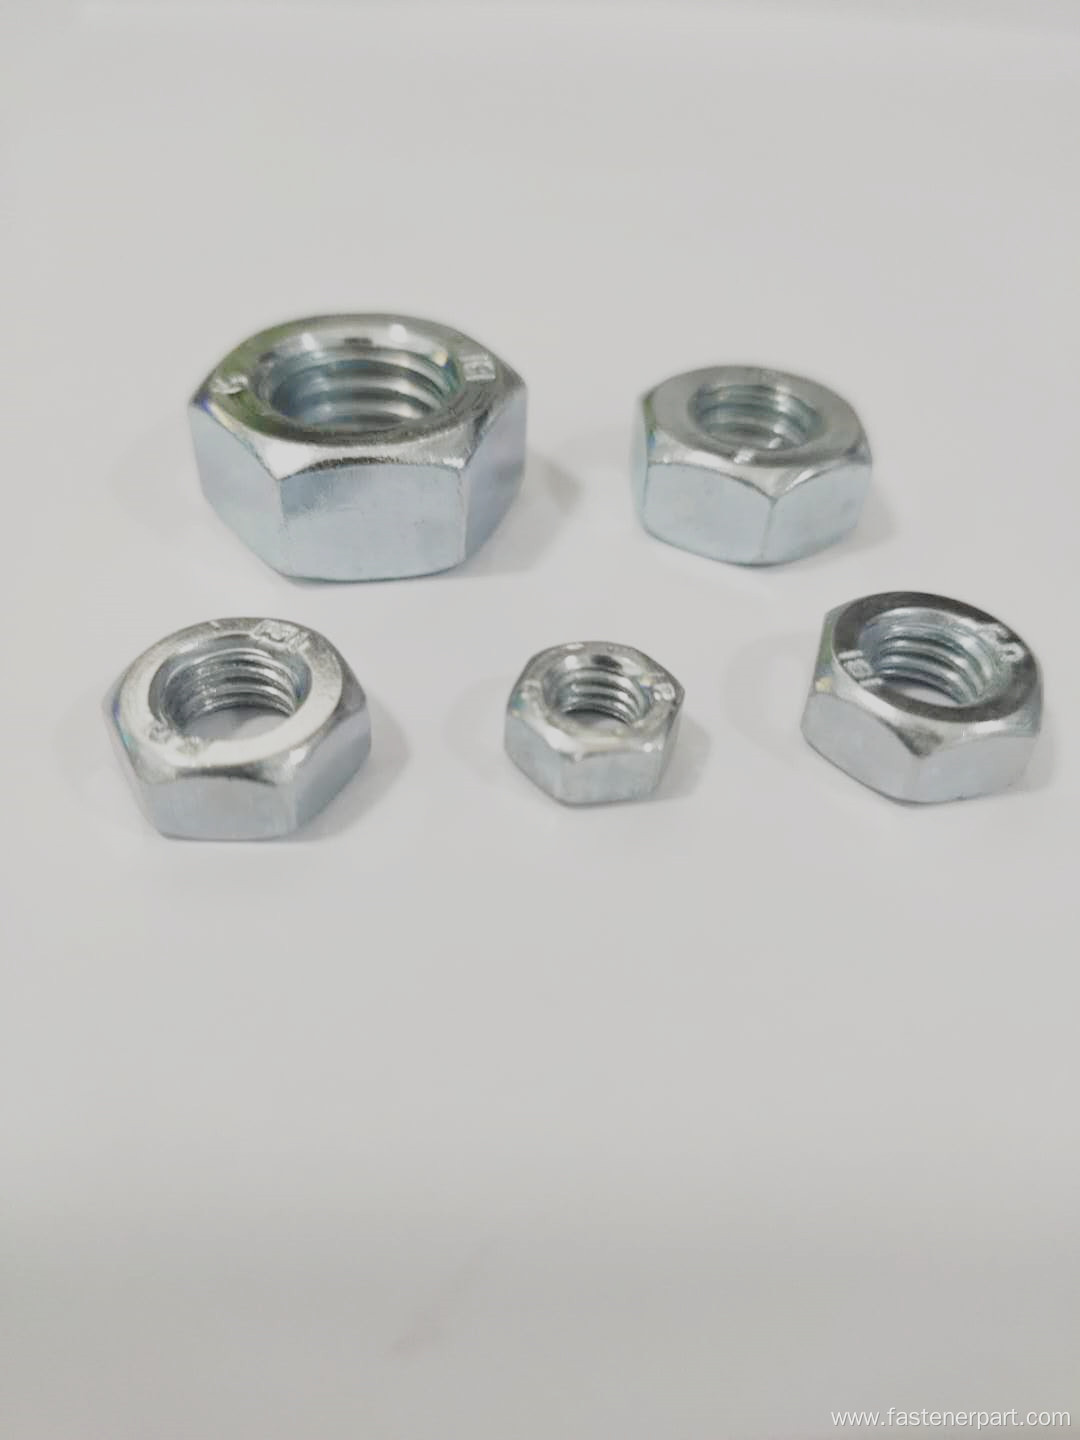 M10 Stainless Steel Joint Hexagonal Thin Nut